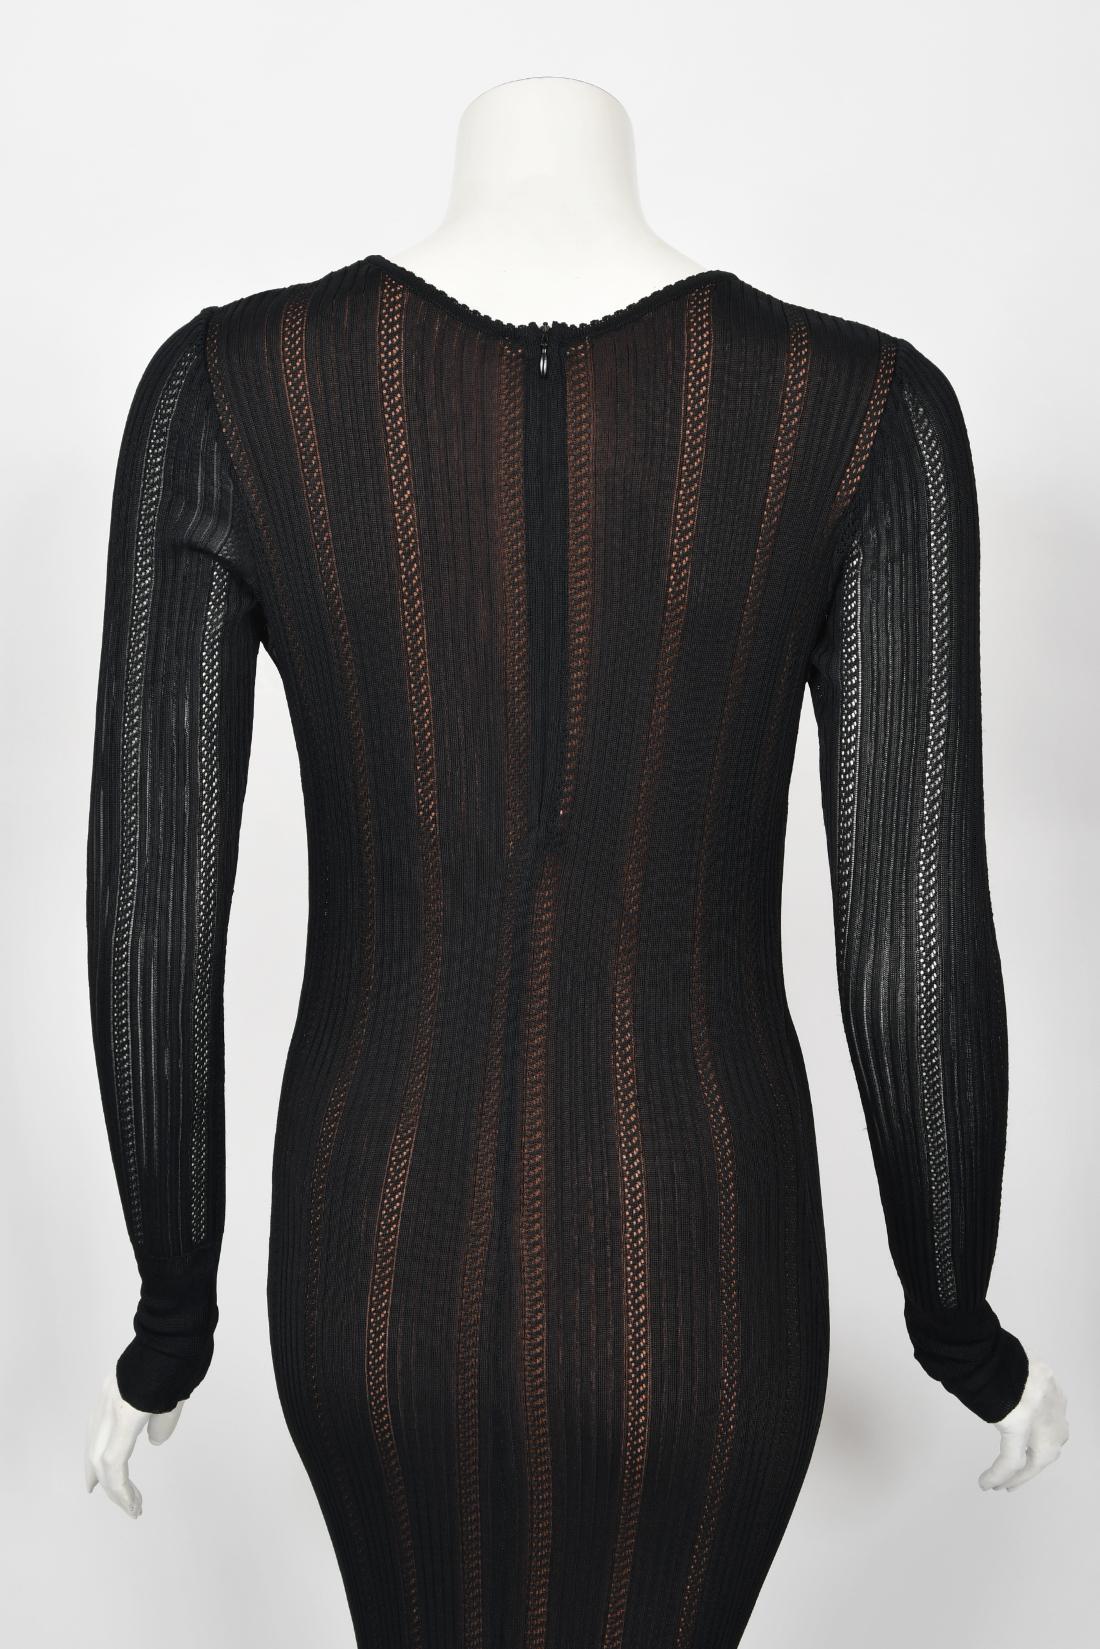 1996 Azzedine Alaia Documented Rare Nude Illusion Knit Bodycon Floor Length Gown For Sale 10